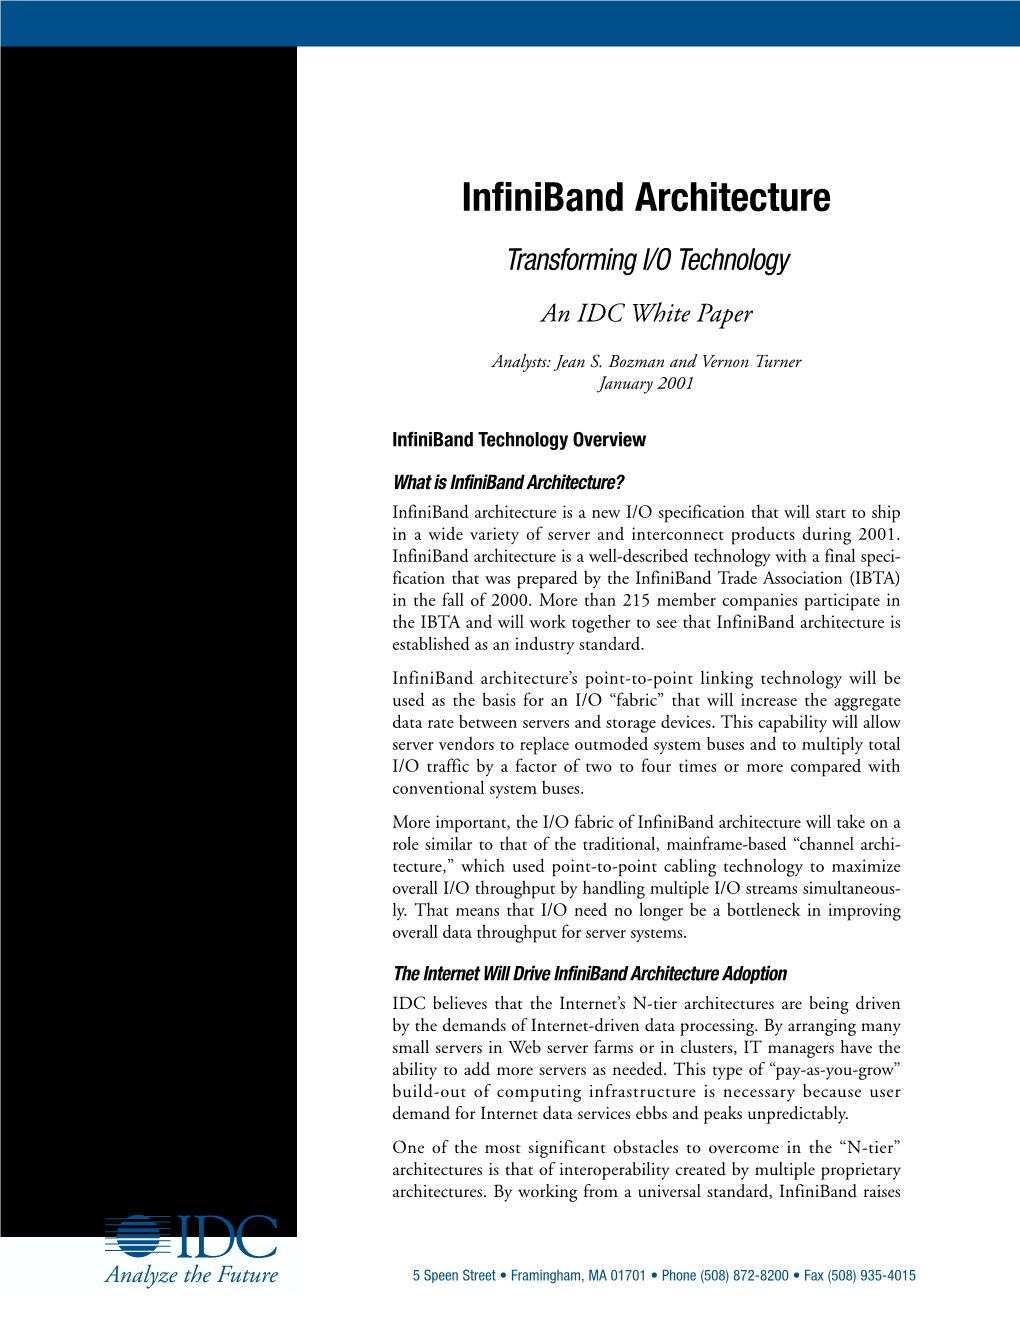 Infiniband Architecture Transforming I/O Technology